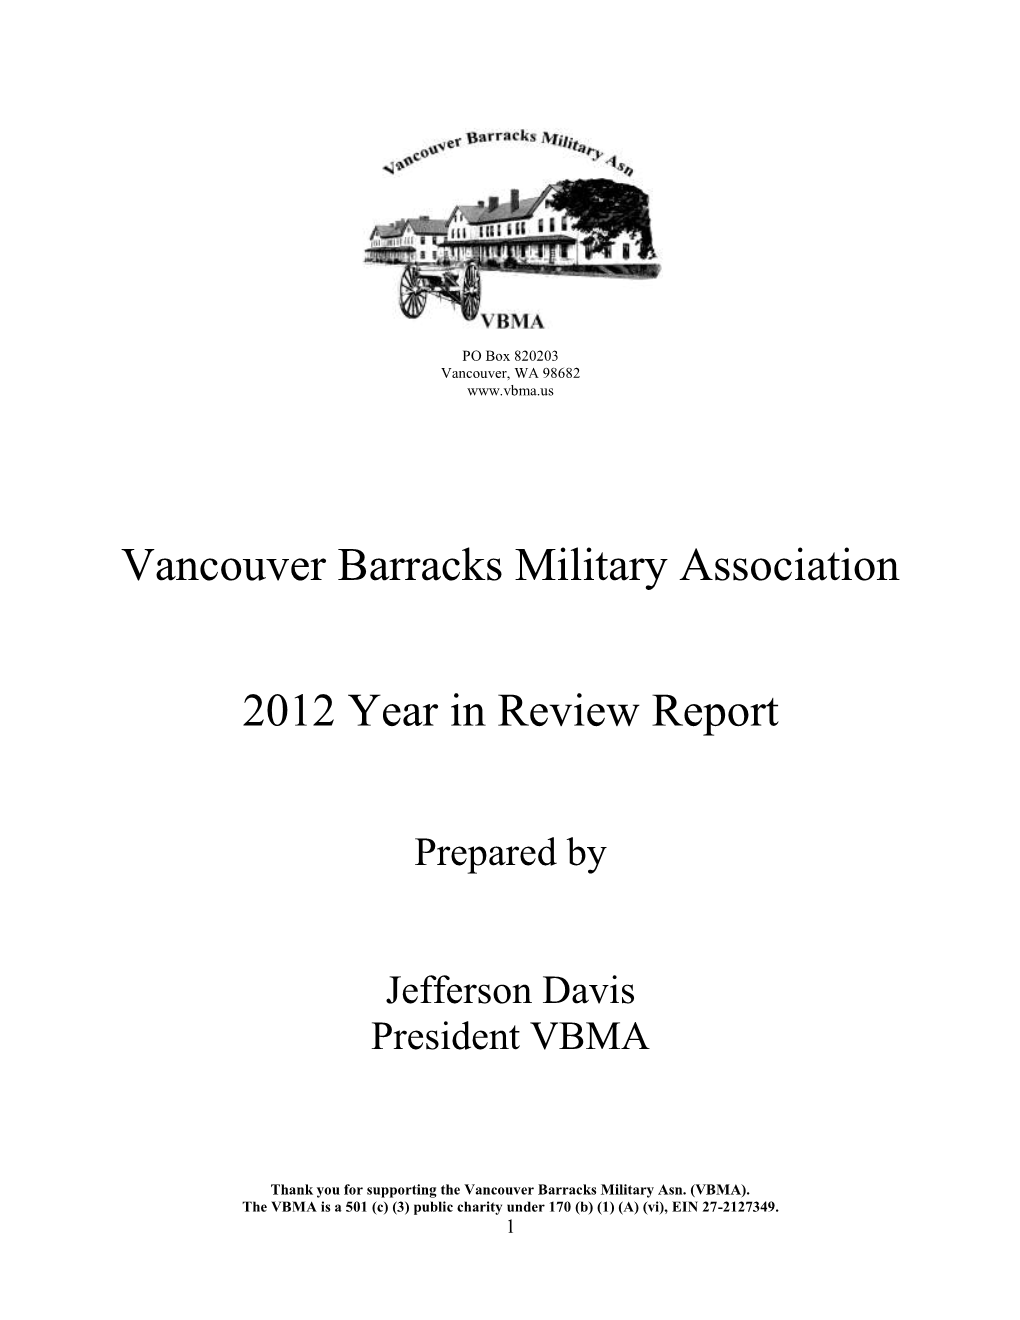 President's Report to the VBMA, 2012 Year in Review